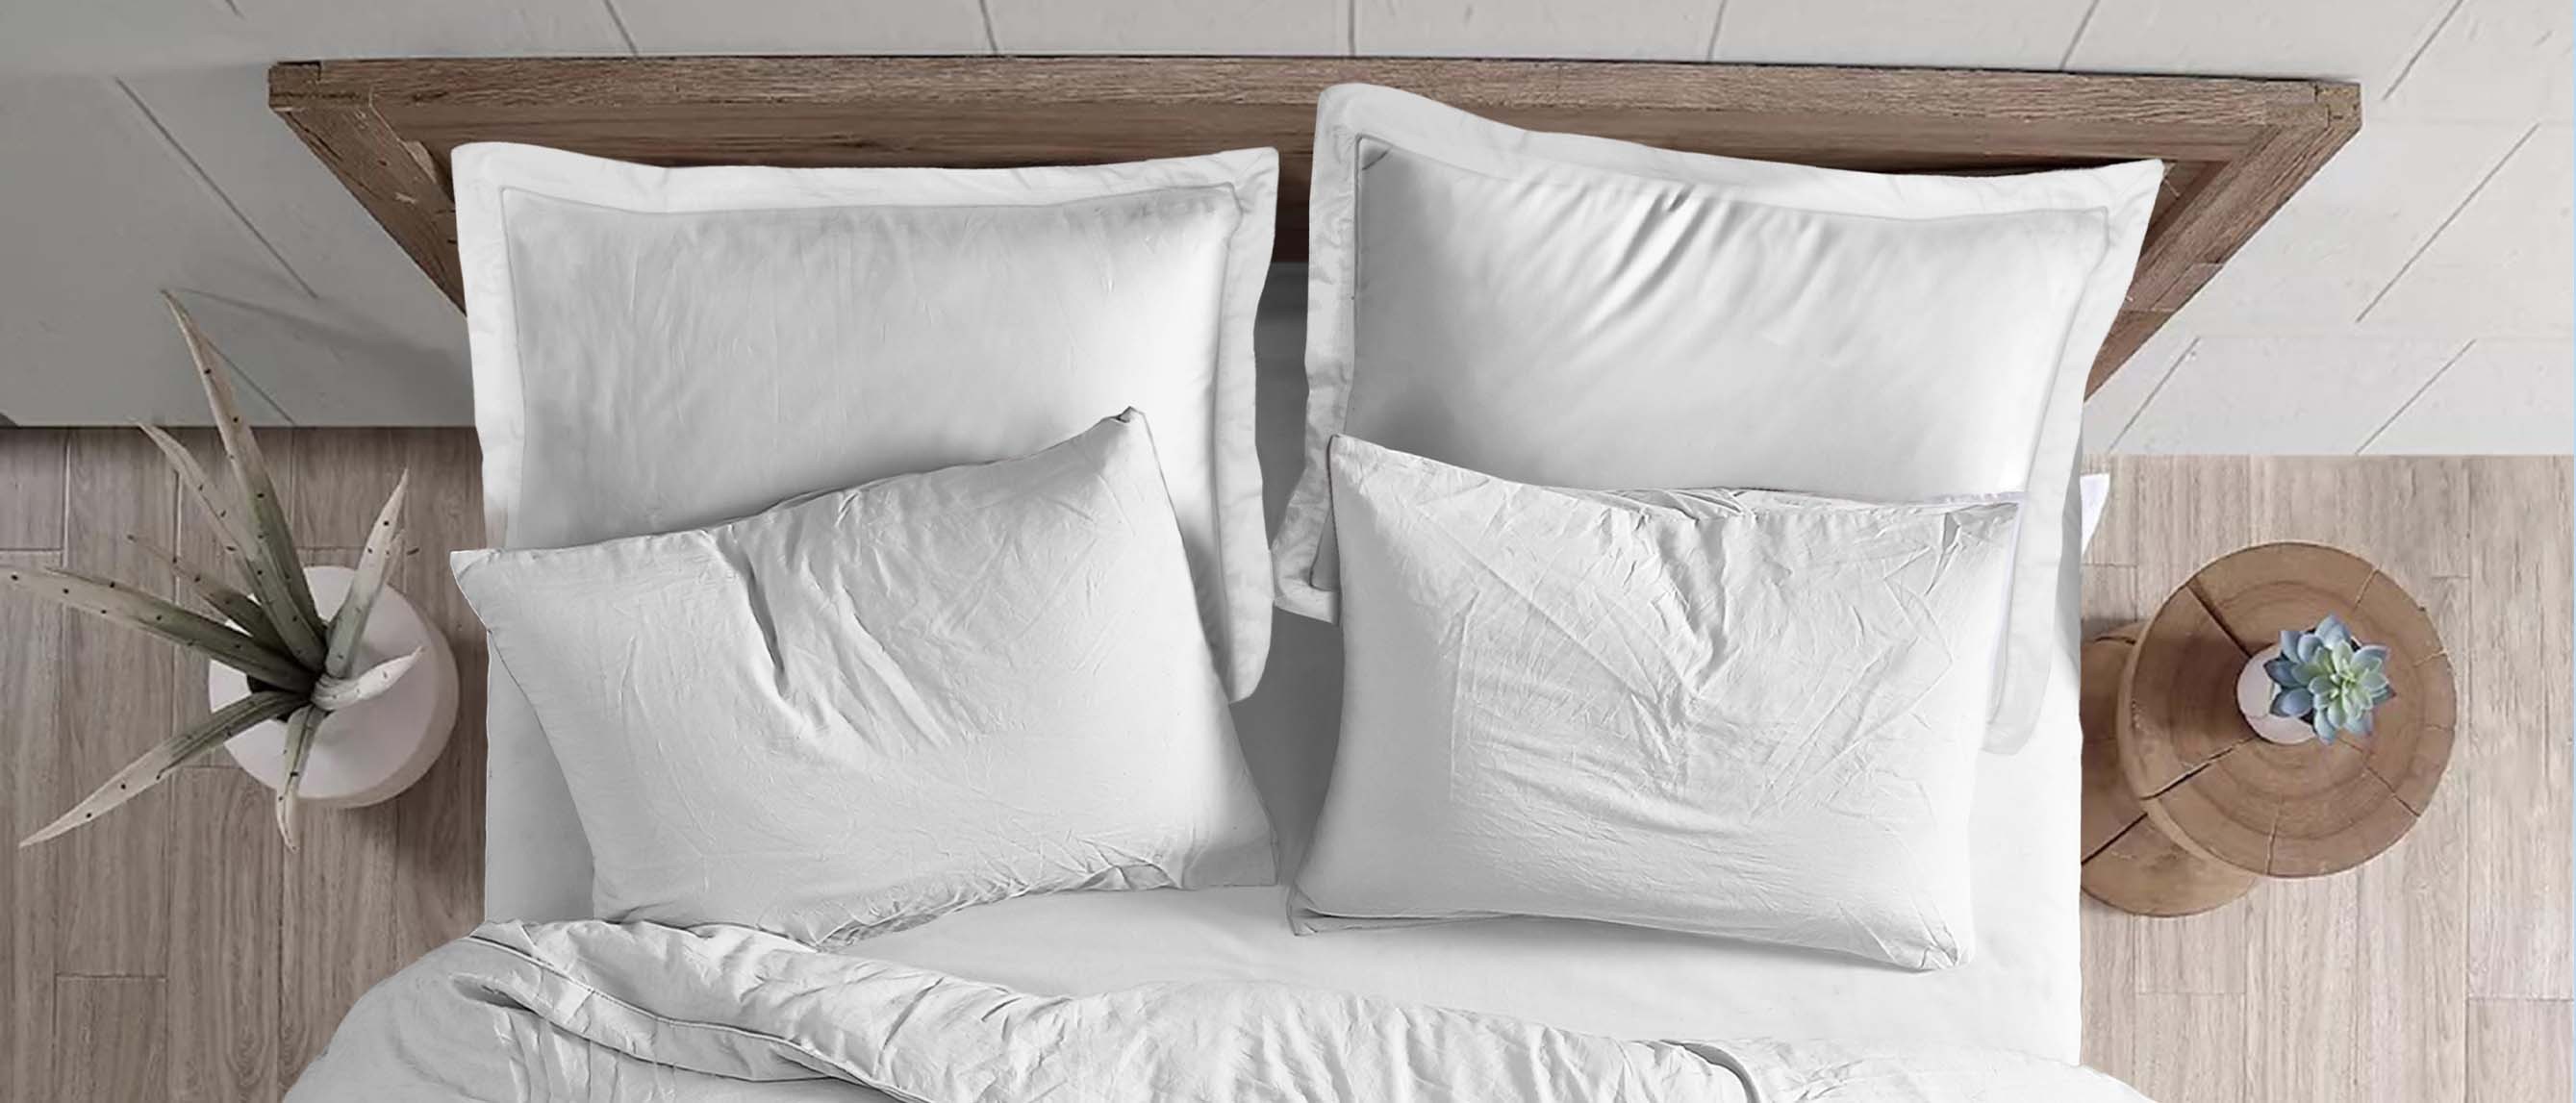 Tips for Cleaning Pillows and Pillowcases - Embassy Cleaners